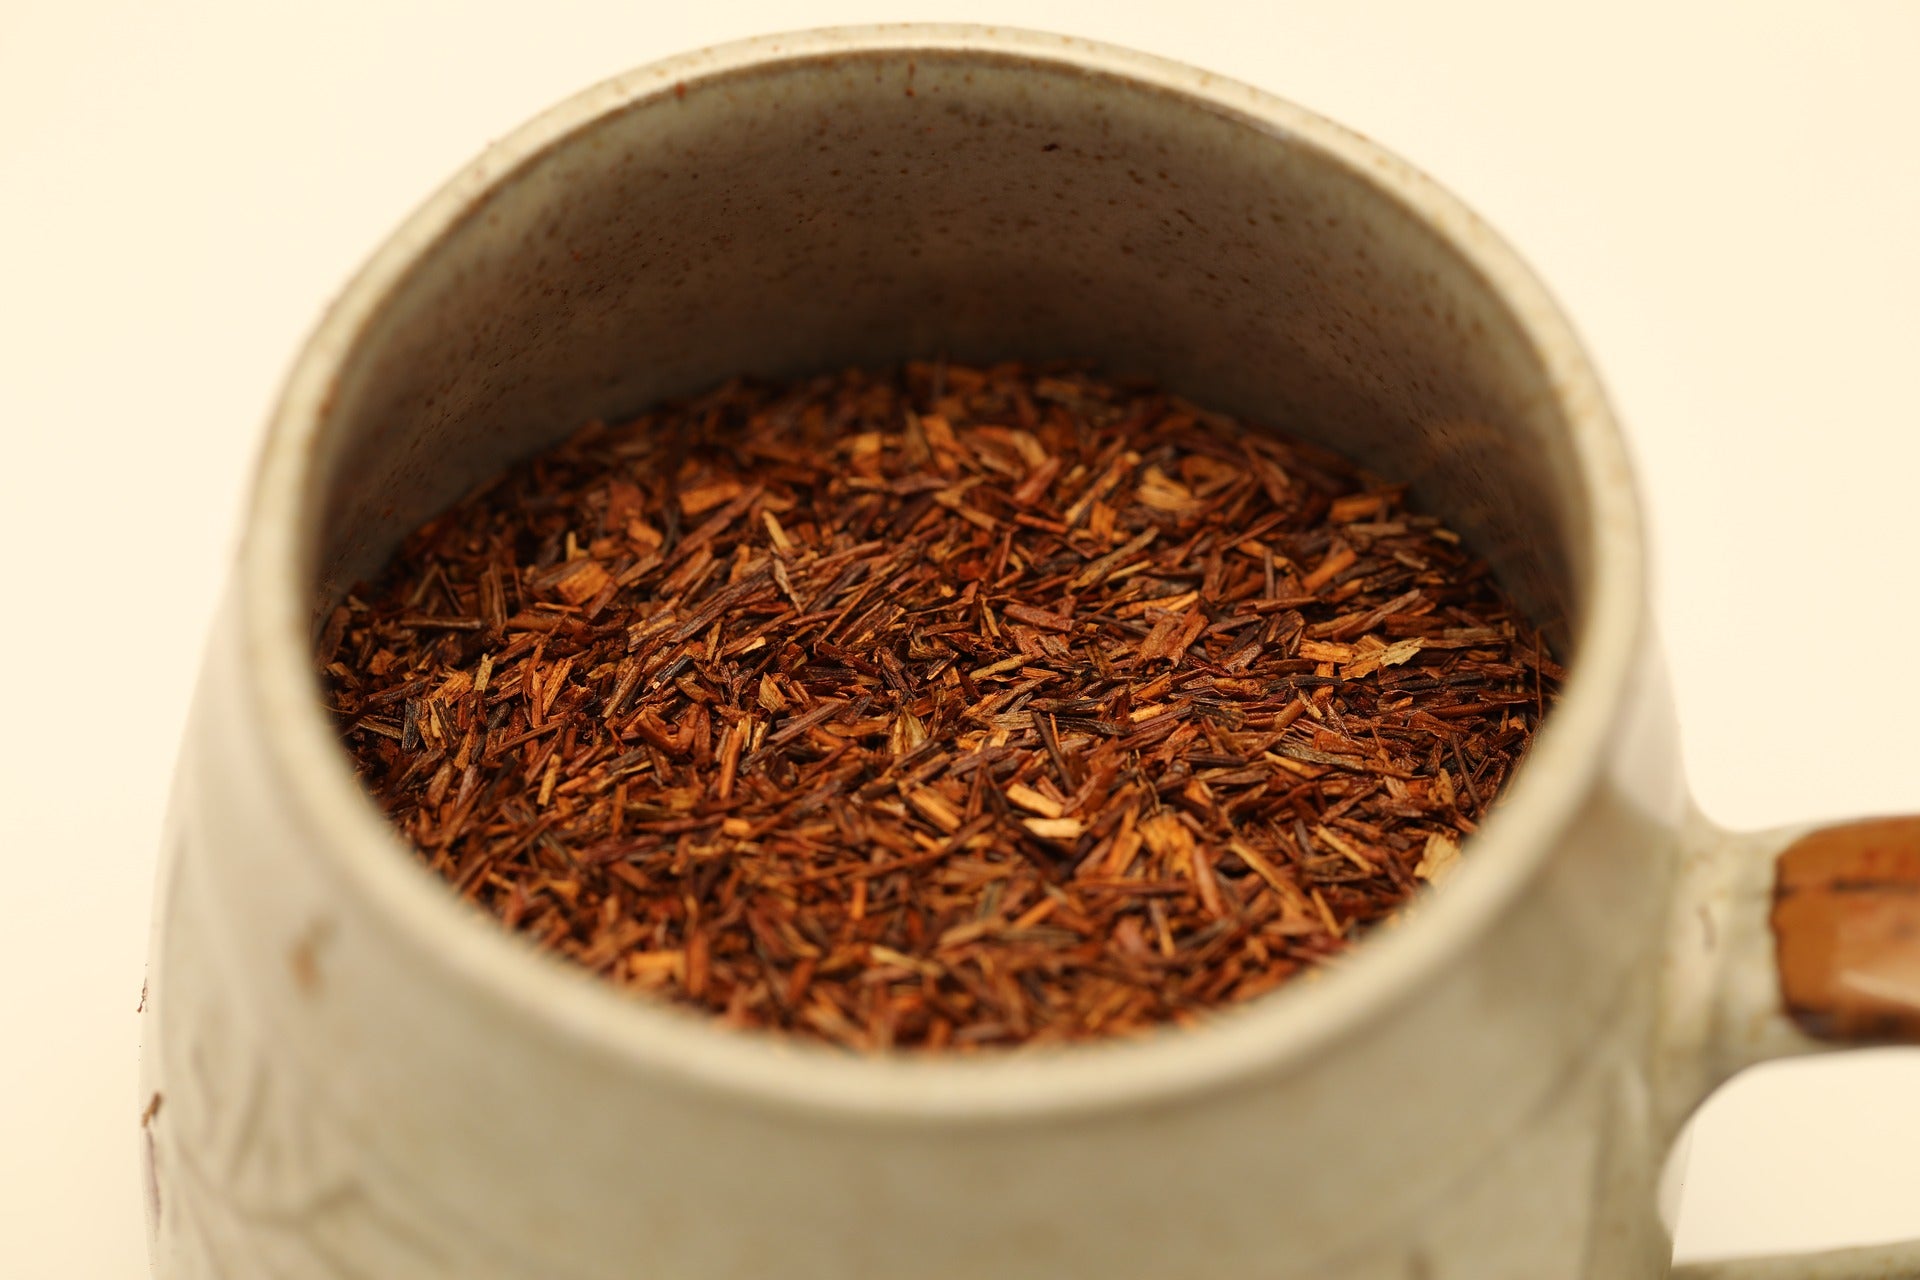 Rooibos tea: Benefits, nutrition, and how to drink it